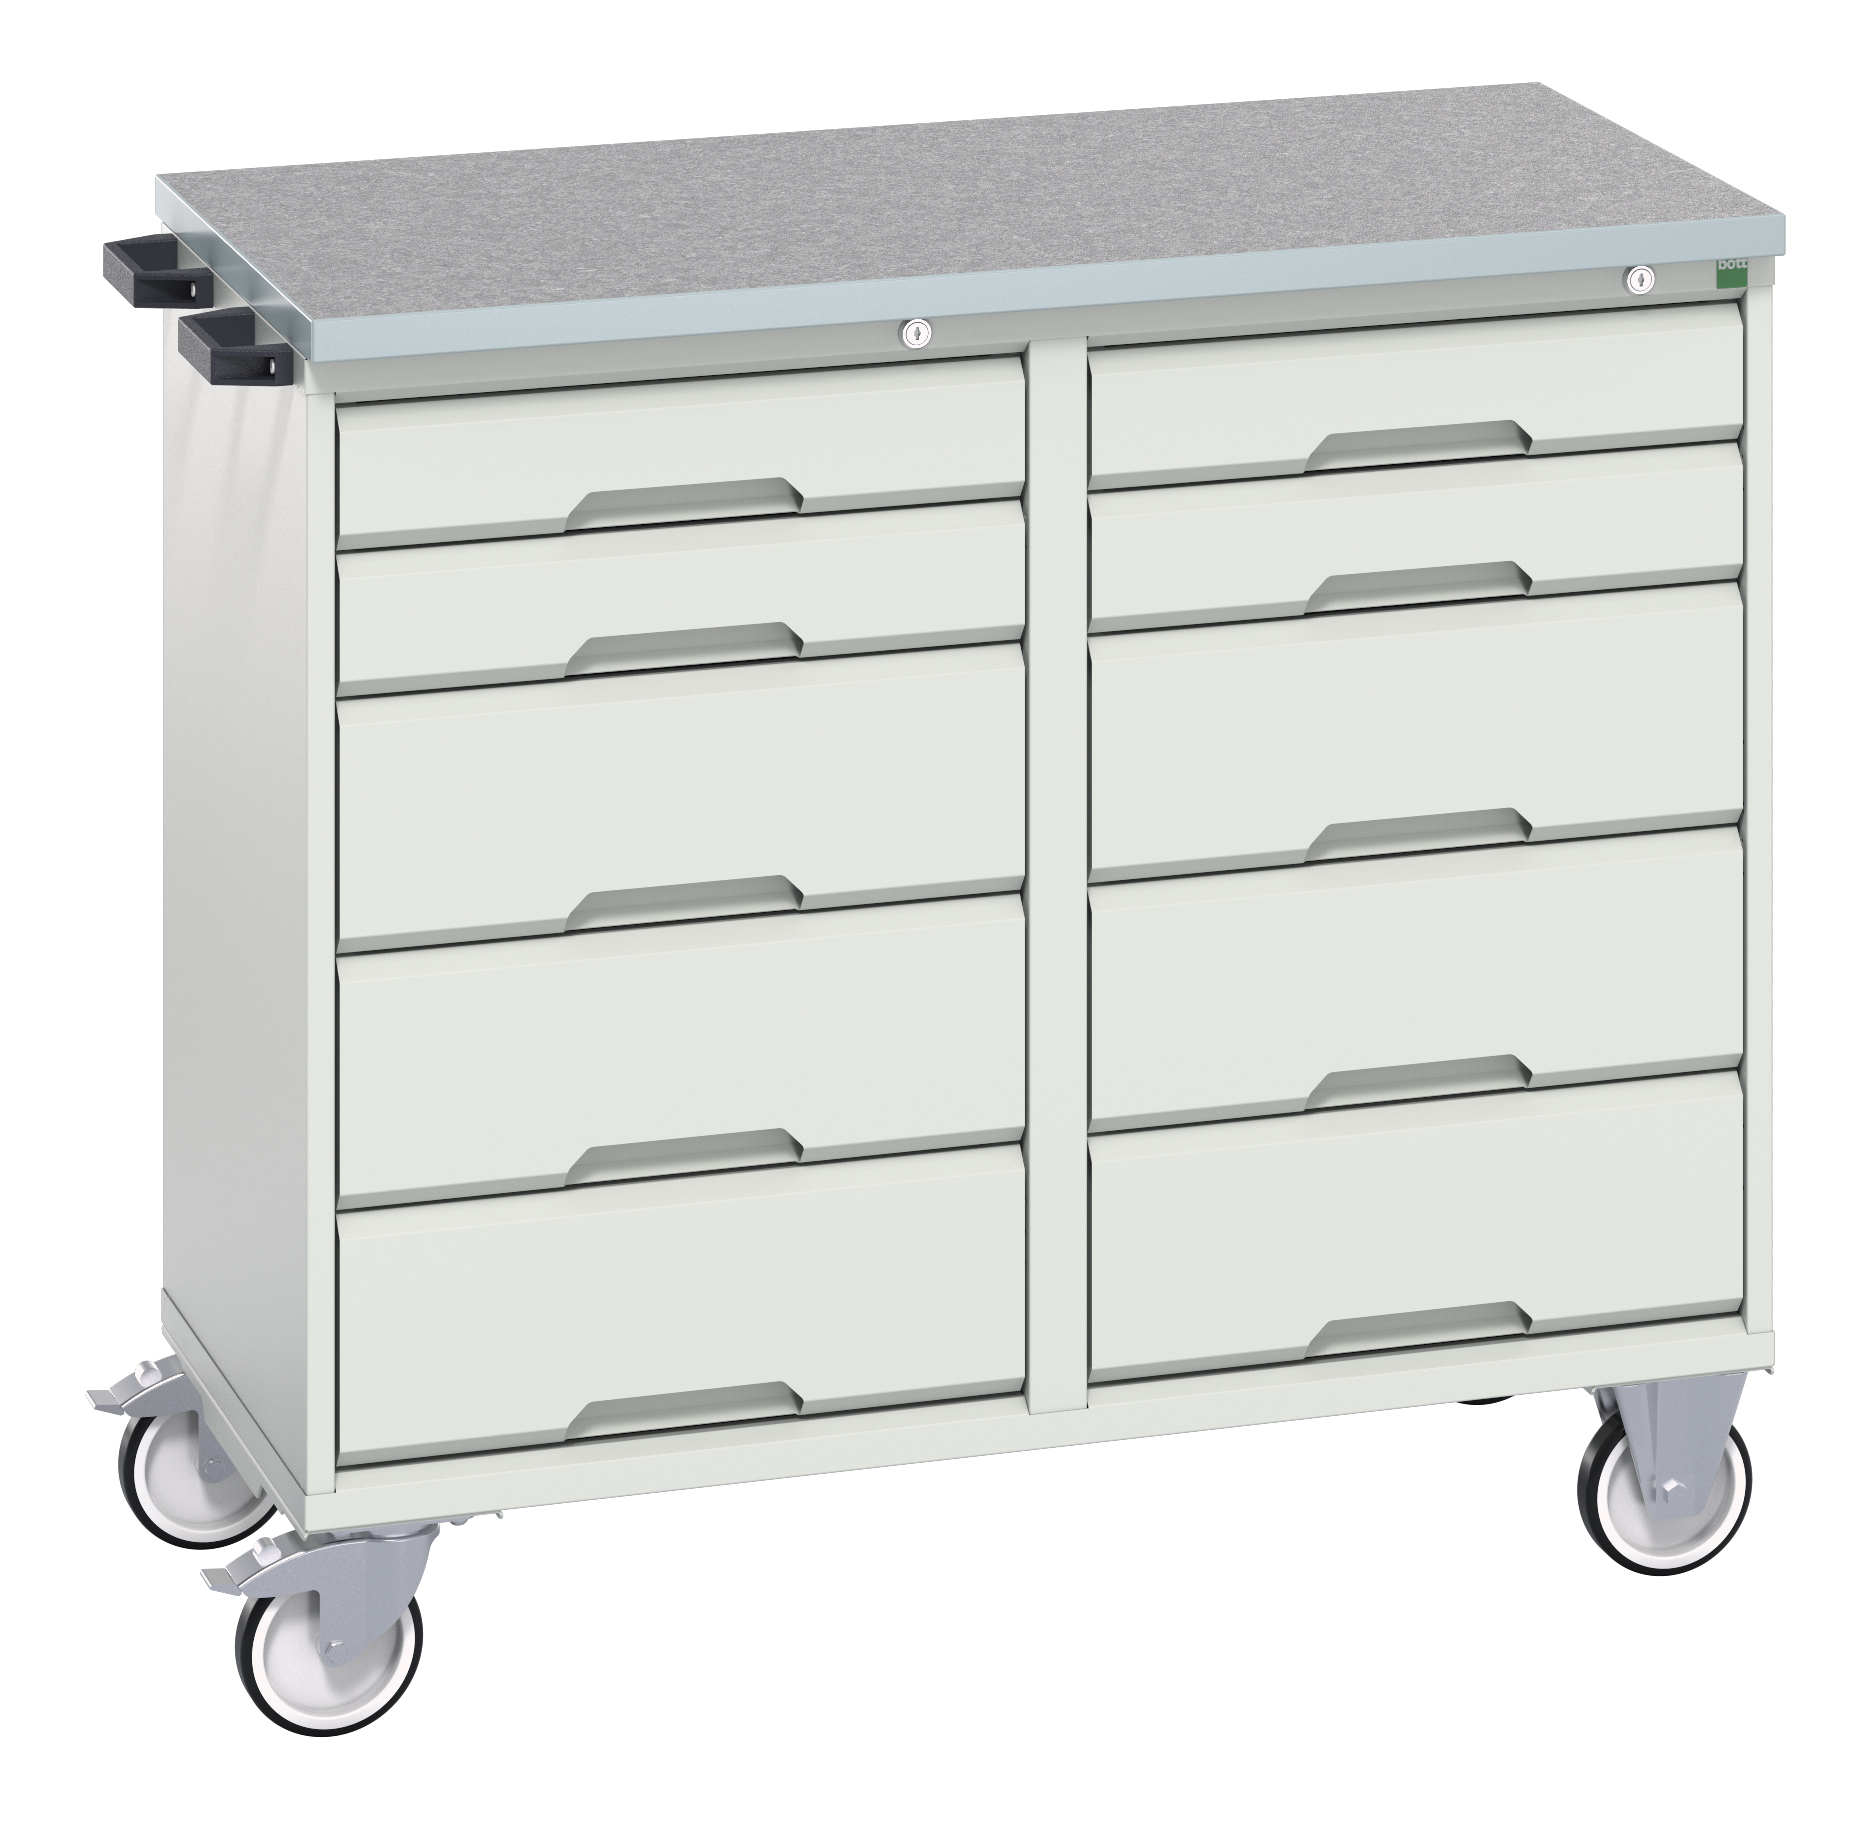 Bott Verso Maintenance Trolley With 10 Drawers & Lino Top - 16927100.16